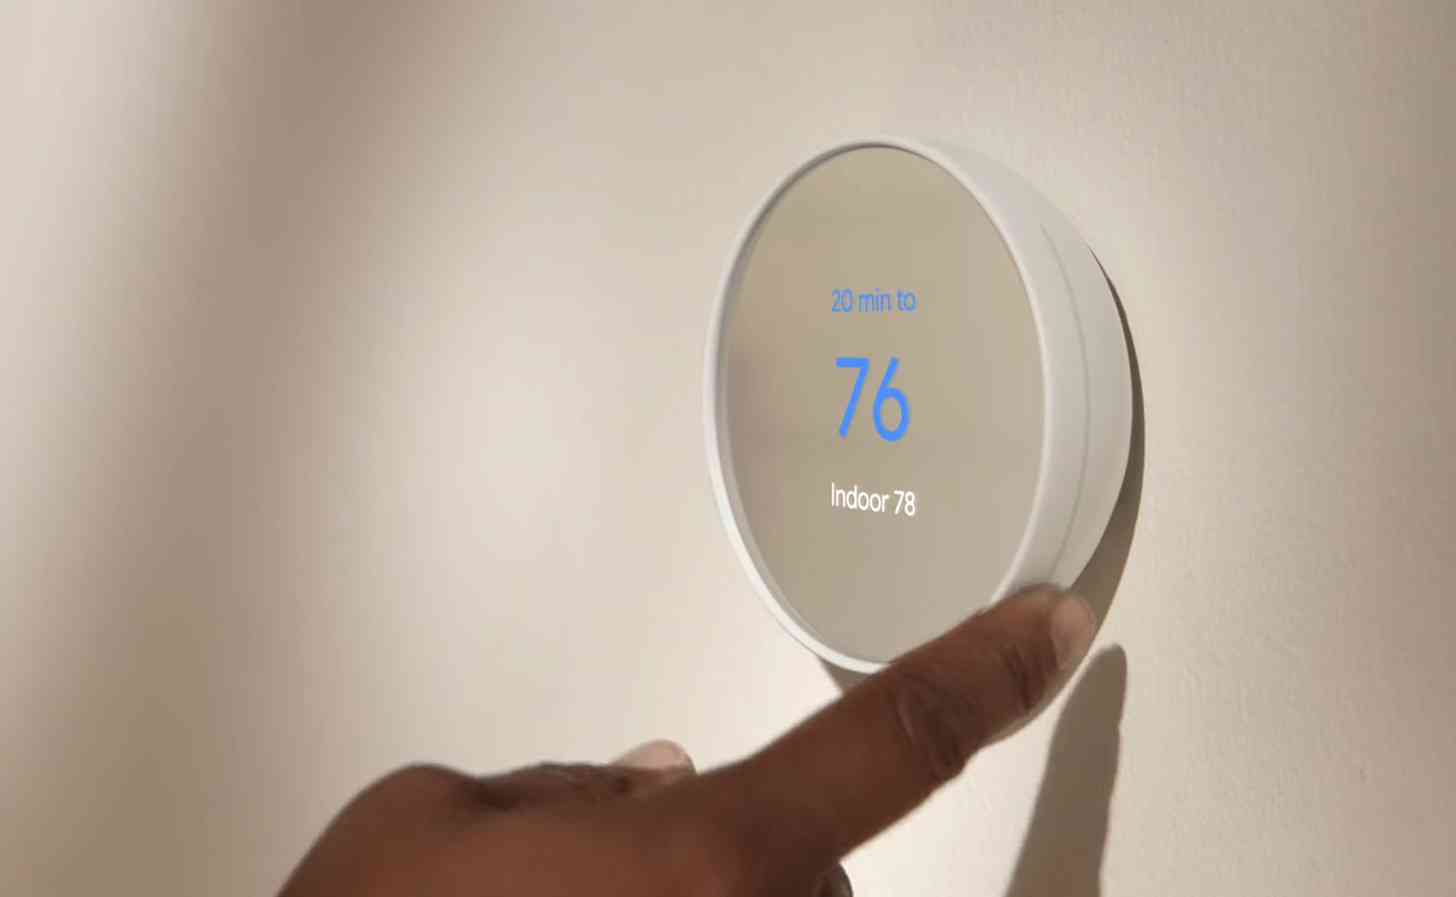 Google's new Nest Thermostat features touchbased control, lower 129